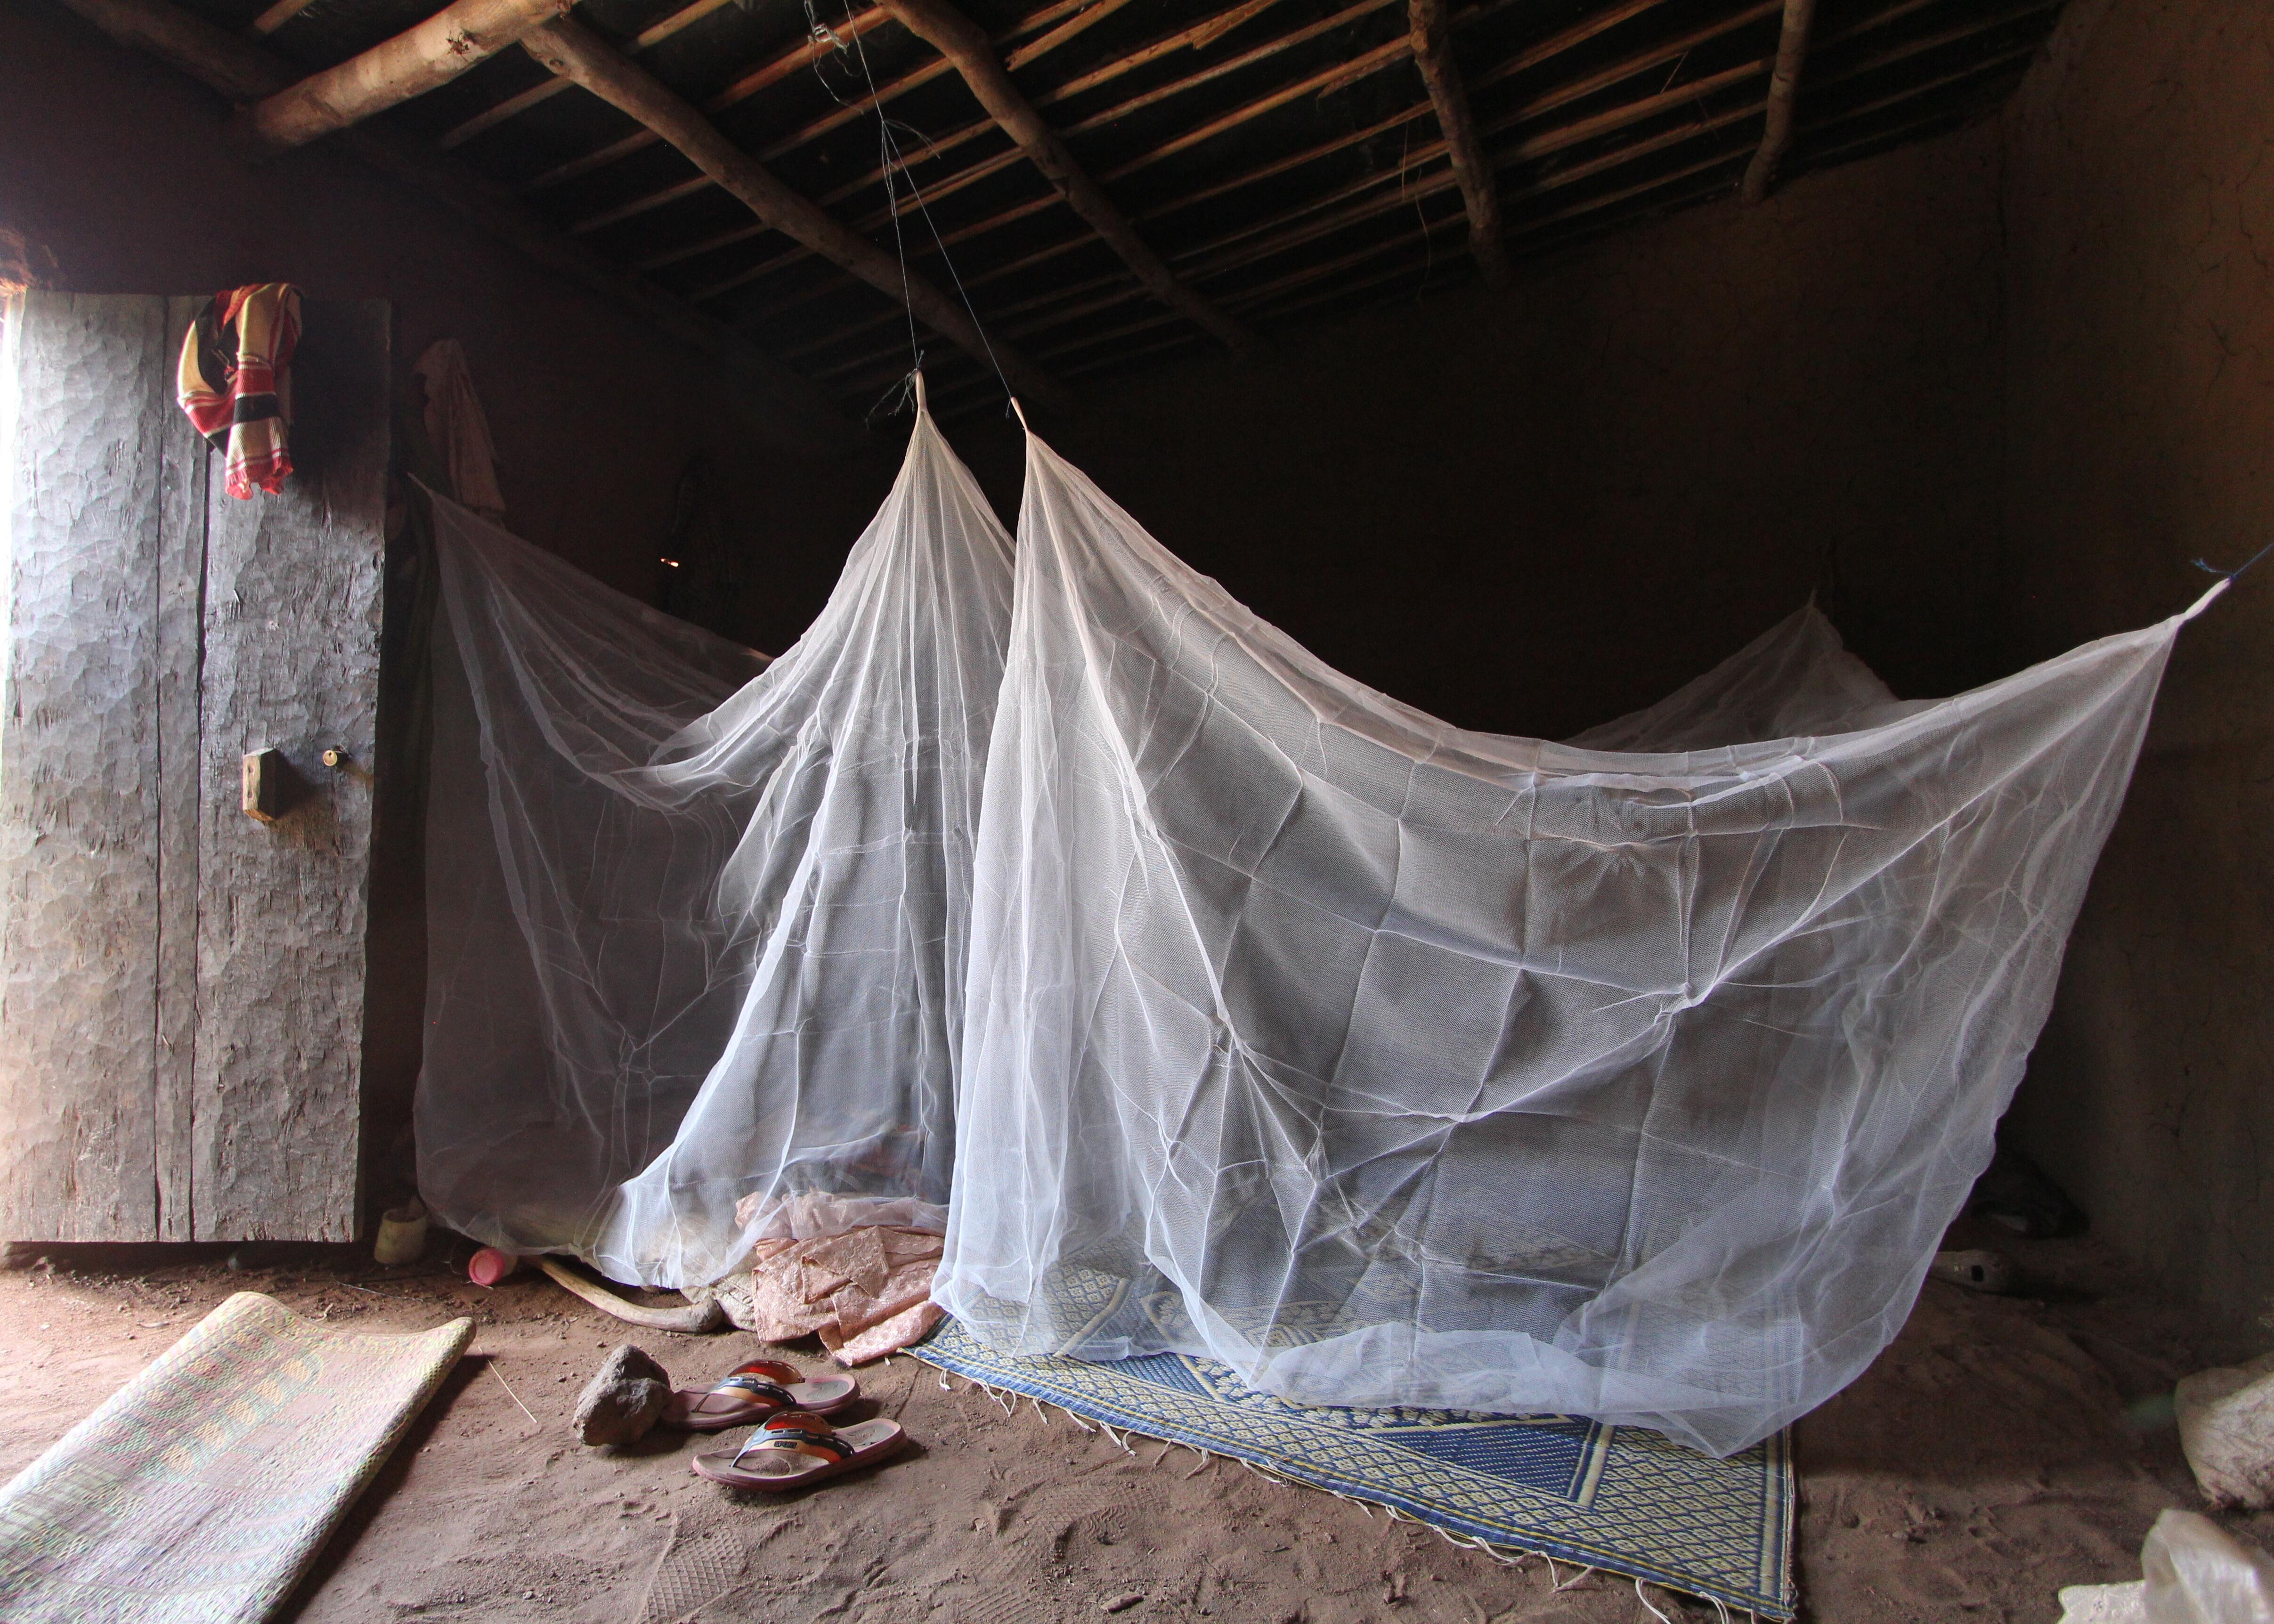 A study bed net in a living space in Burkina Faso. Credit: Durham University/Steve Lindsay